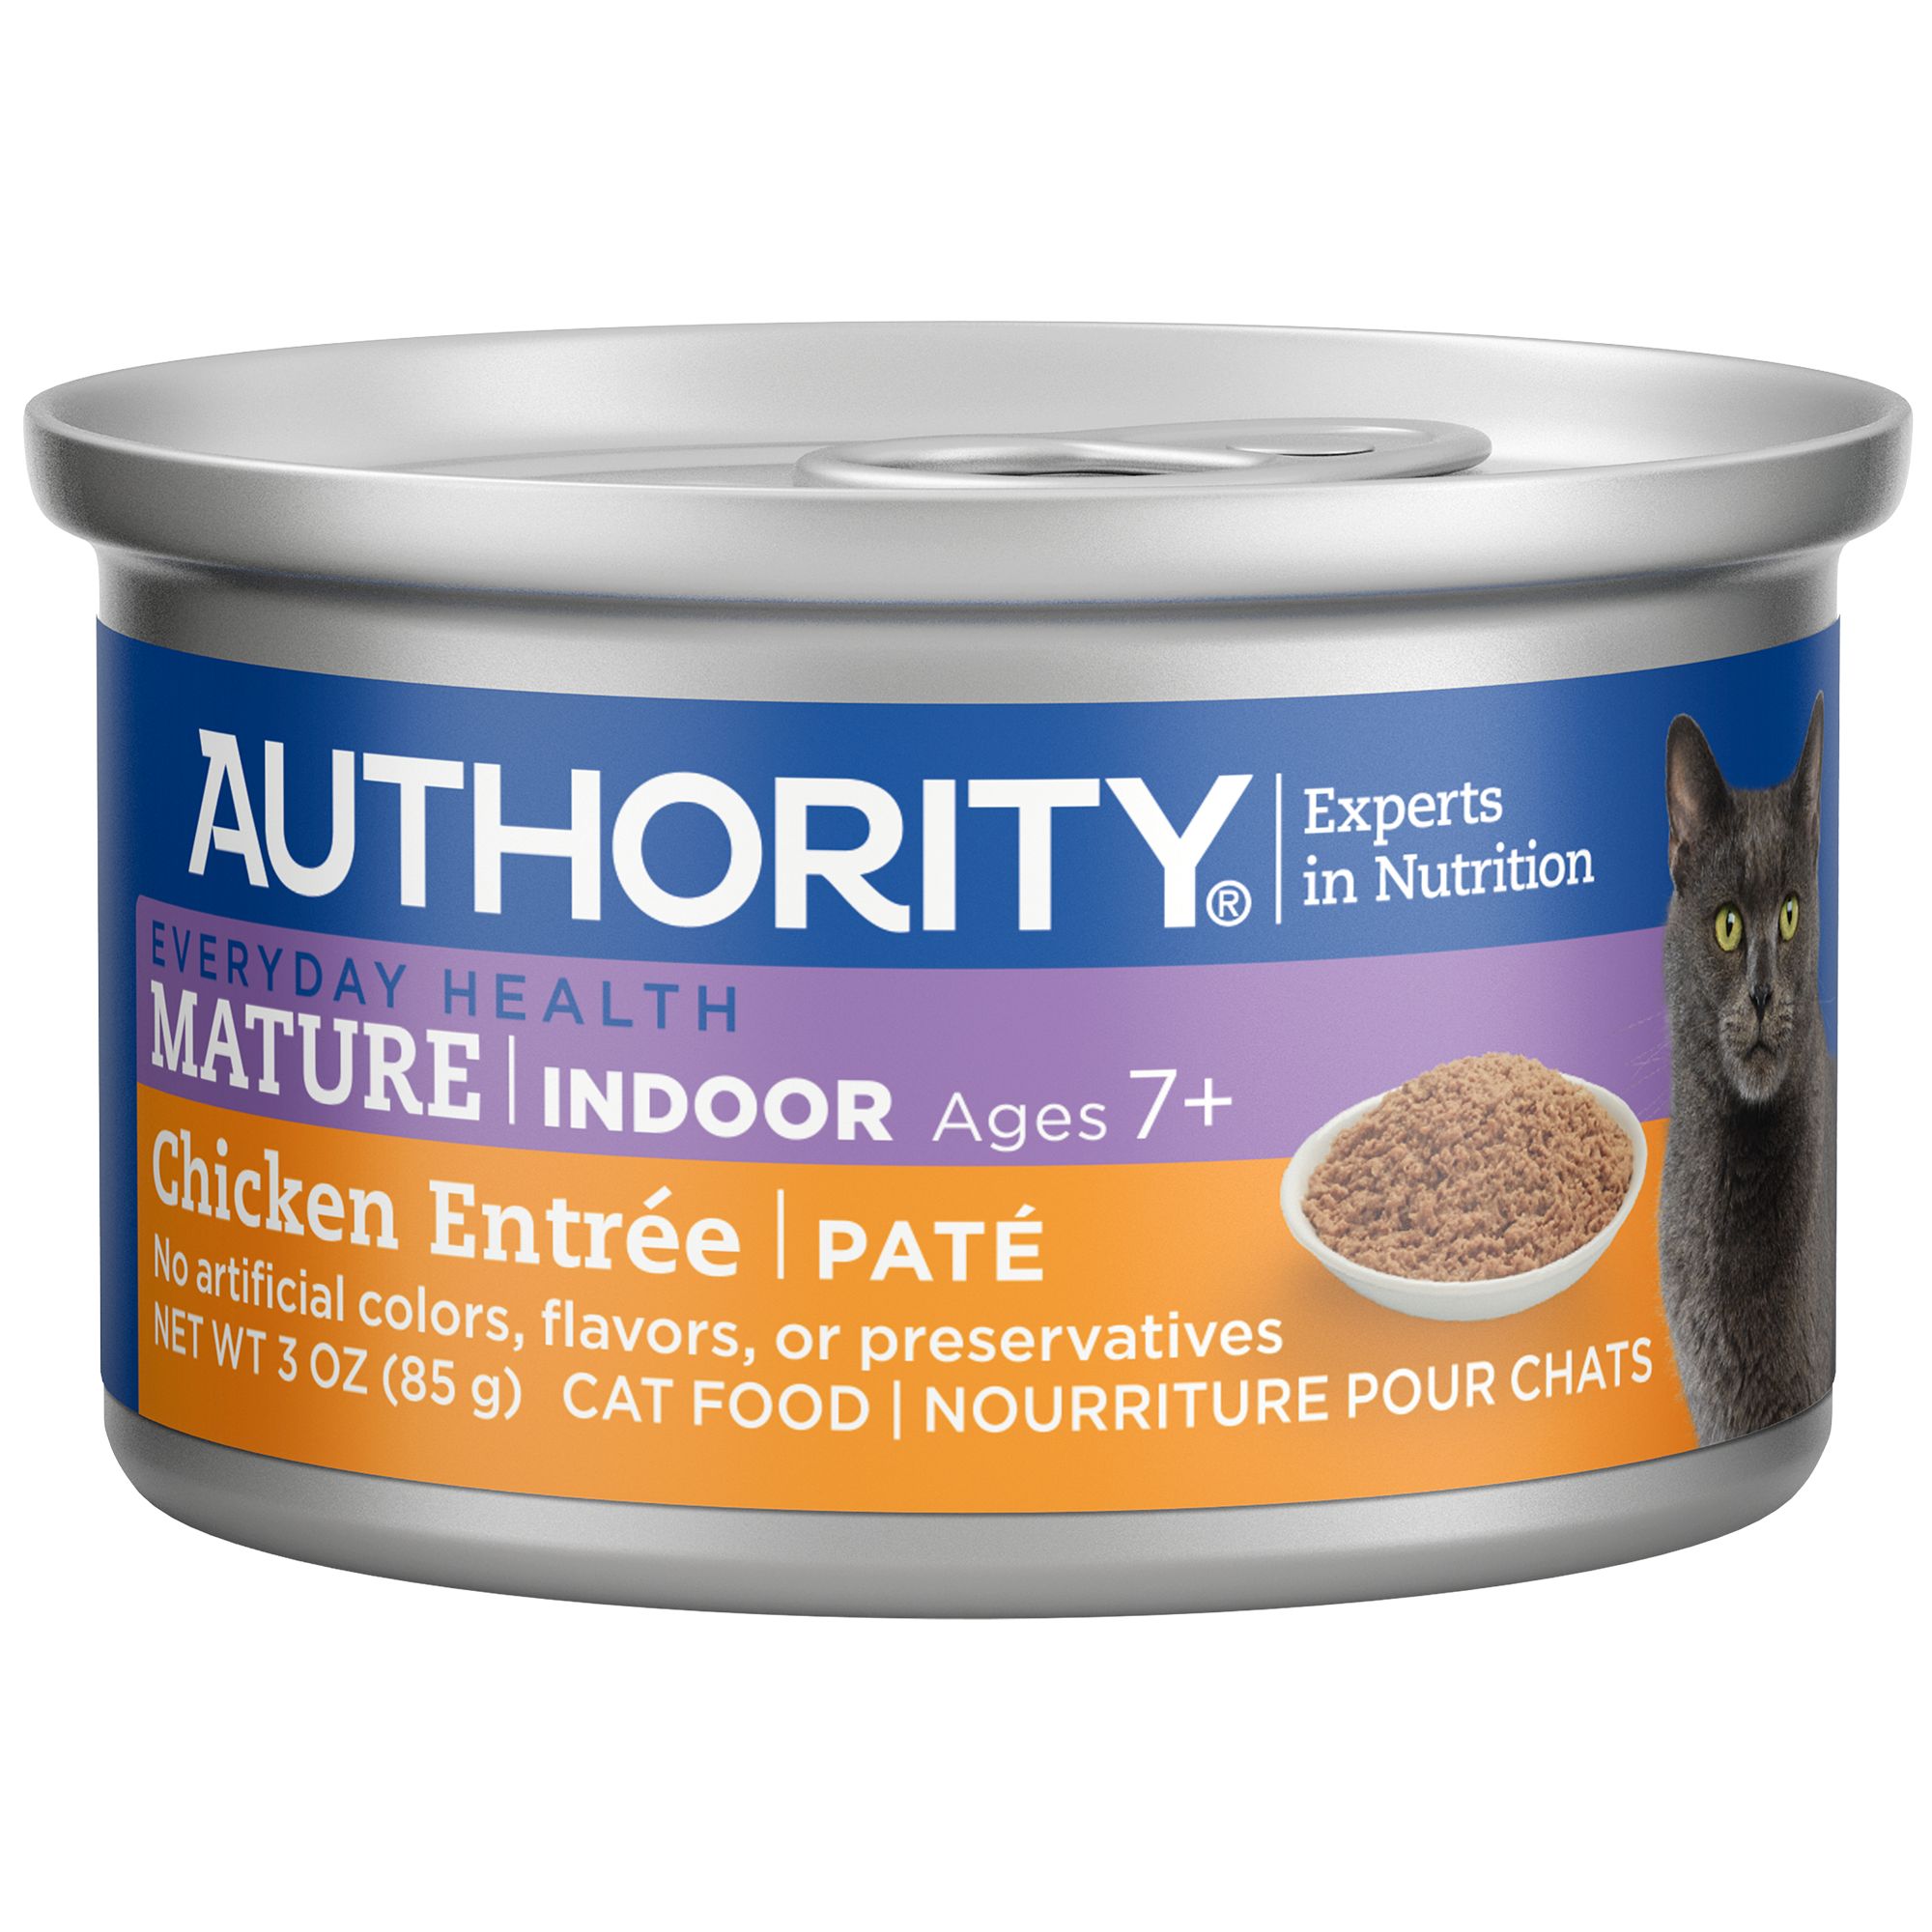 Authority Cat Food Reviews 2021